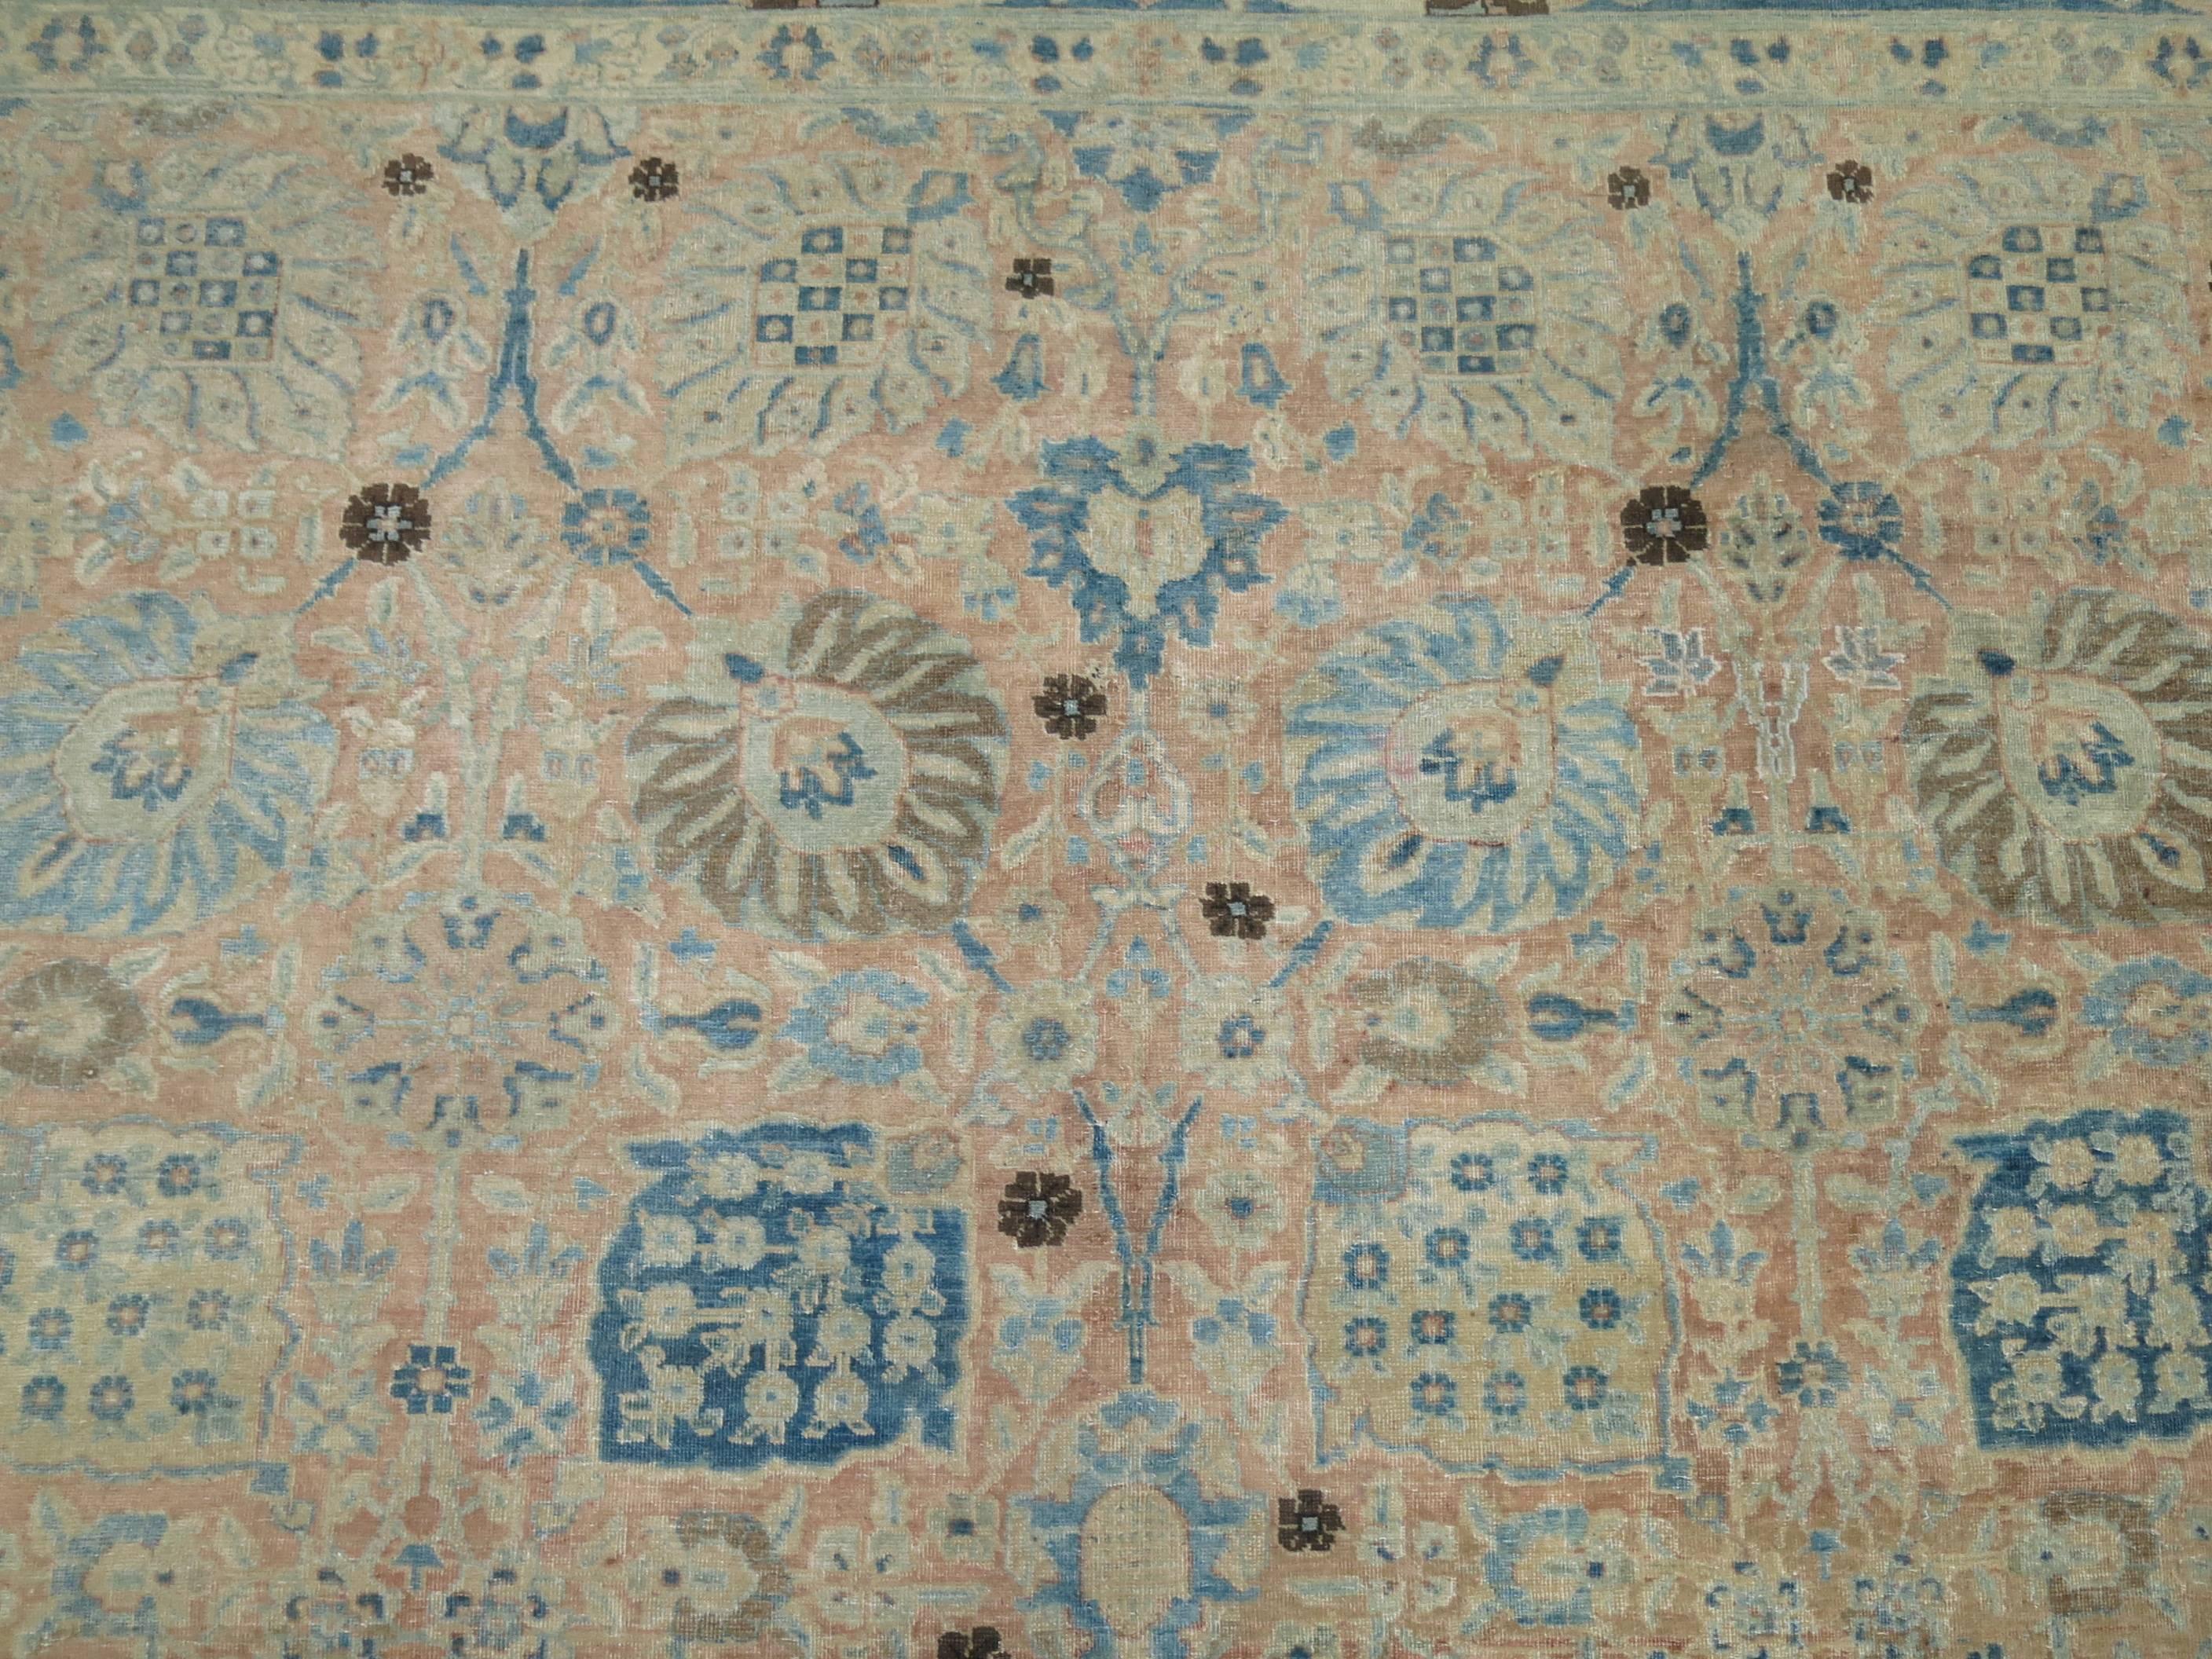 Exquisite early 20th century antique Persian Tabriz rug in camels and blues.